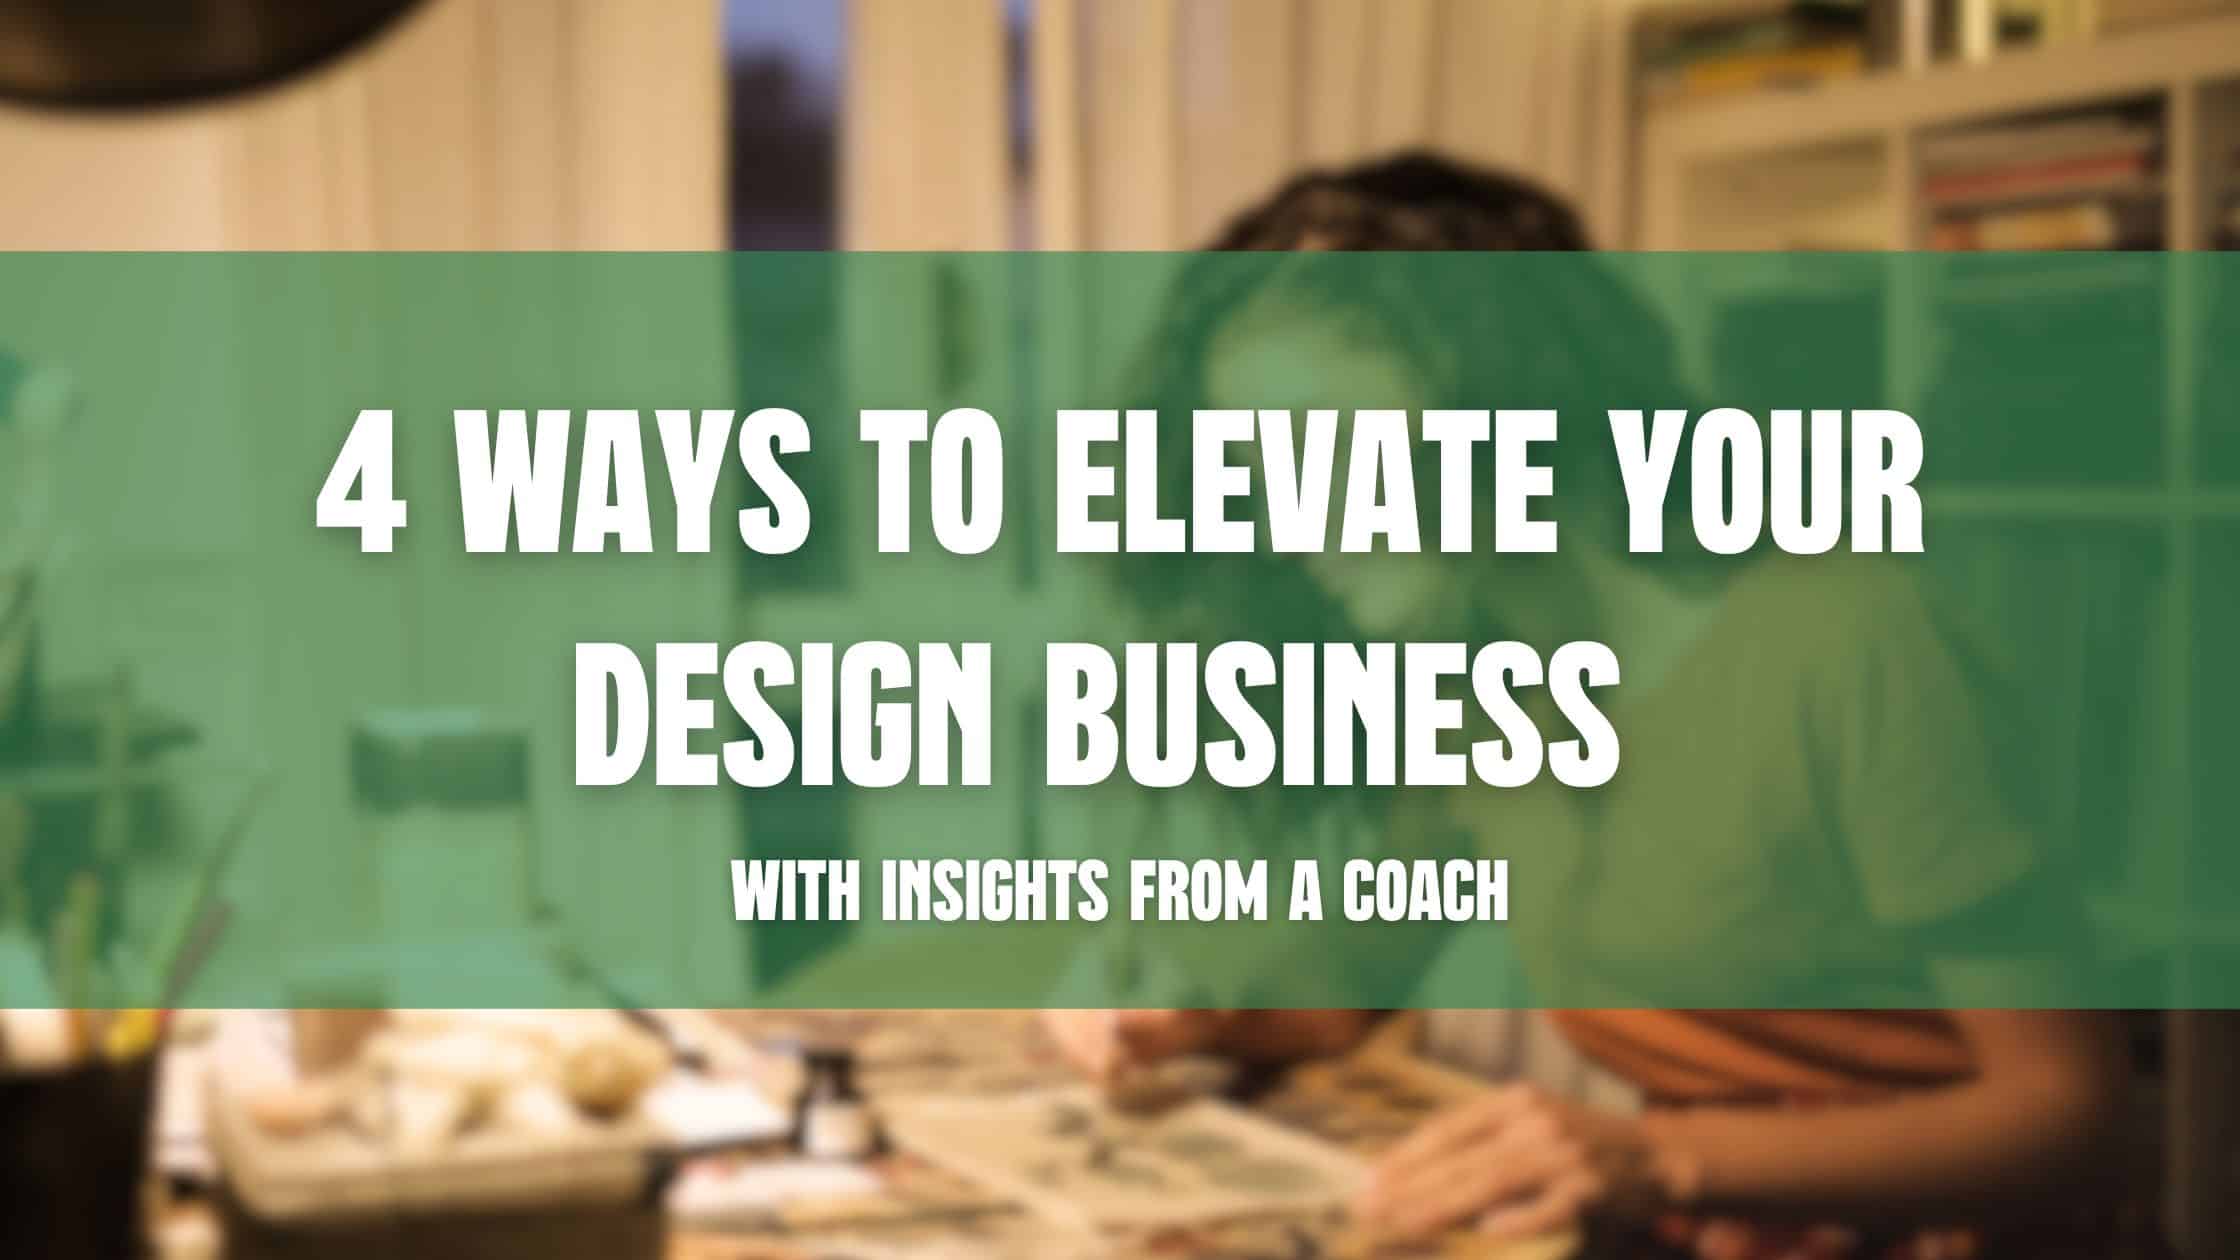 4 Ways to elevate your design business with a design coach